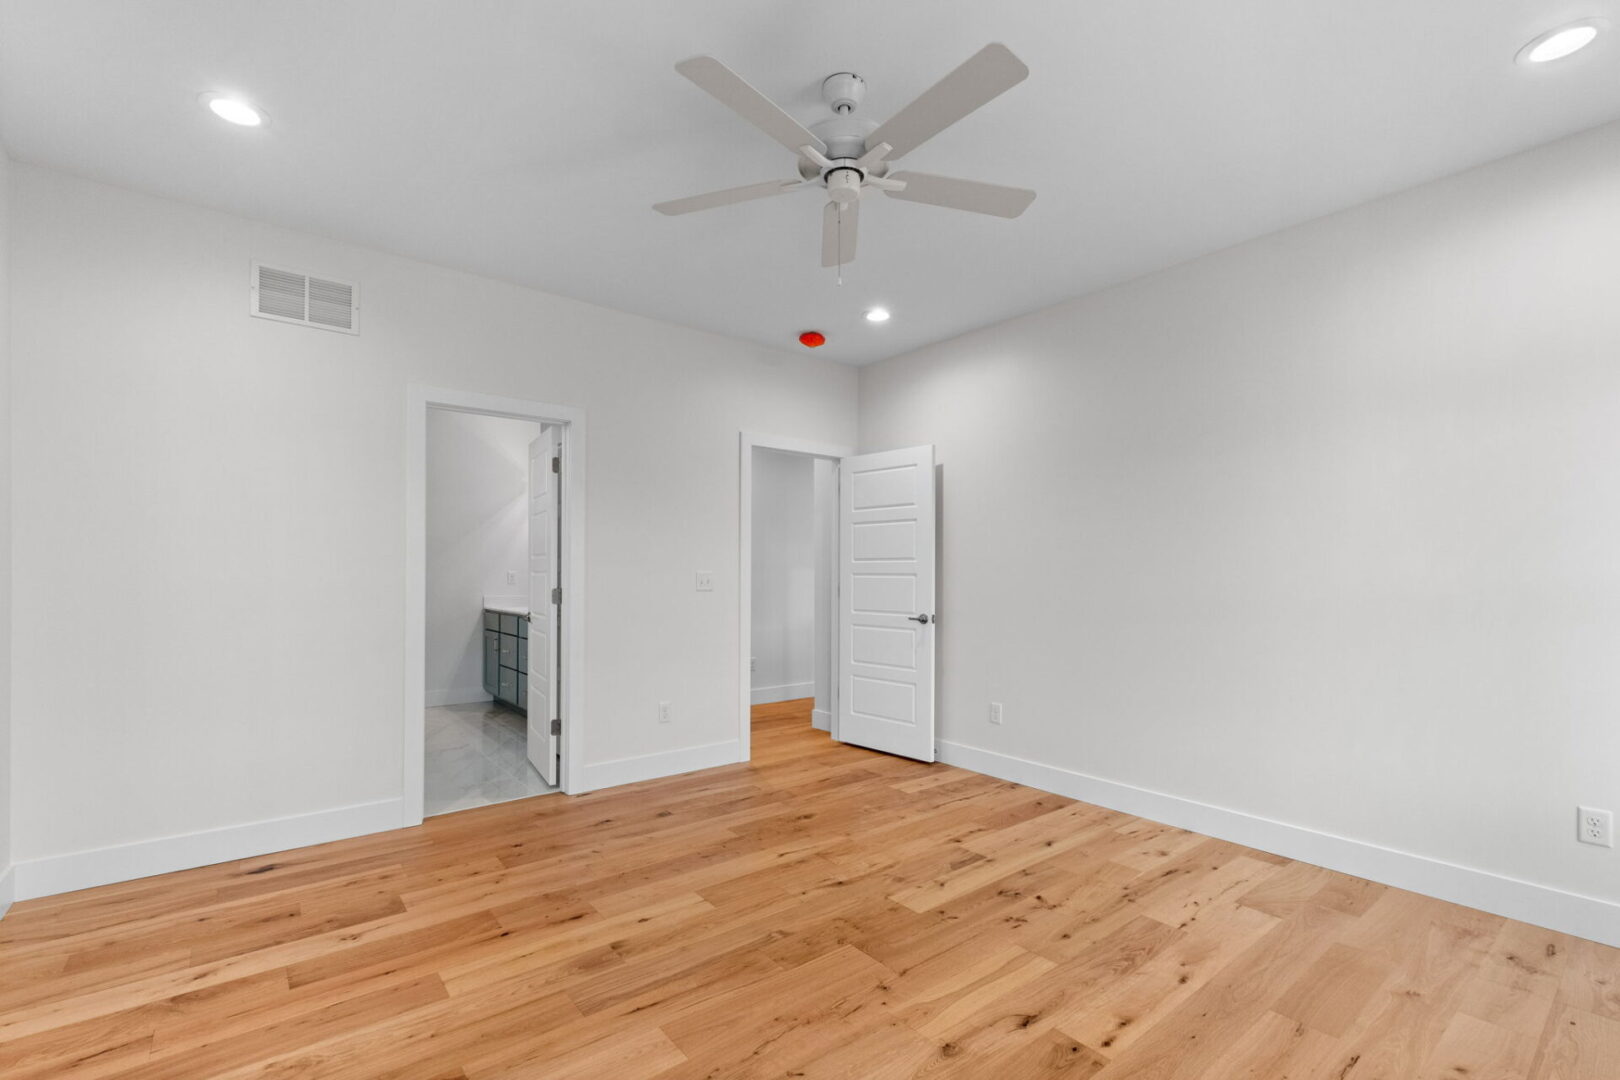 An empty room with a fan and two doors